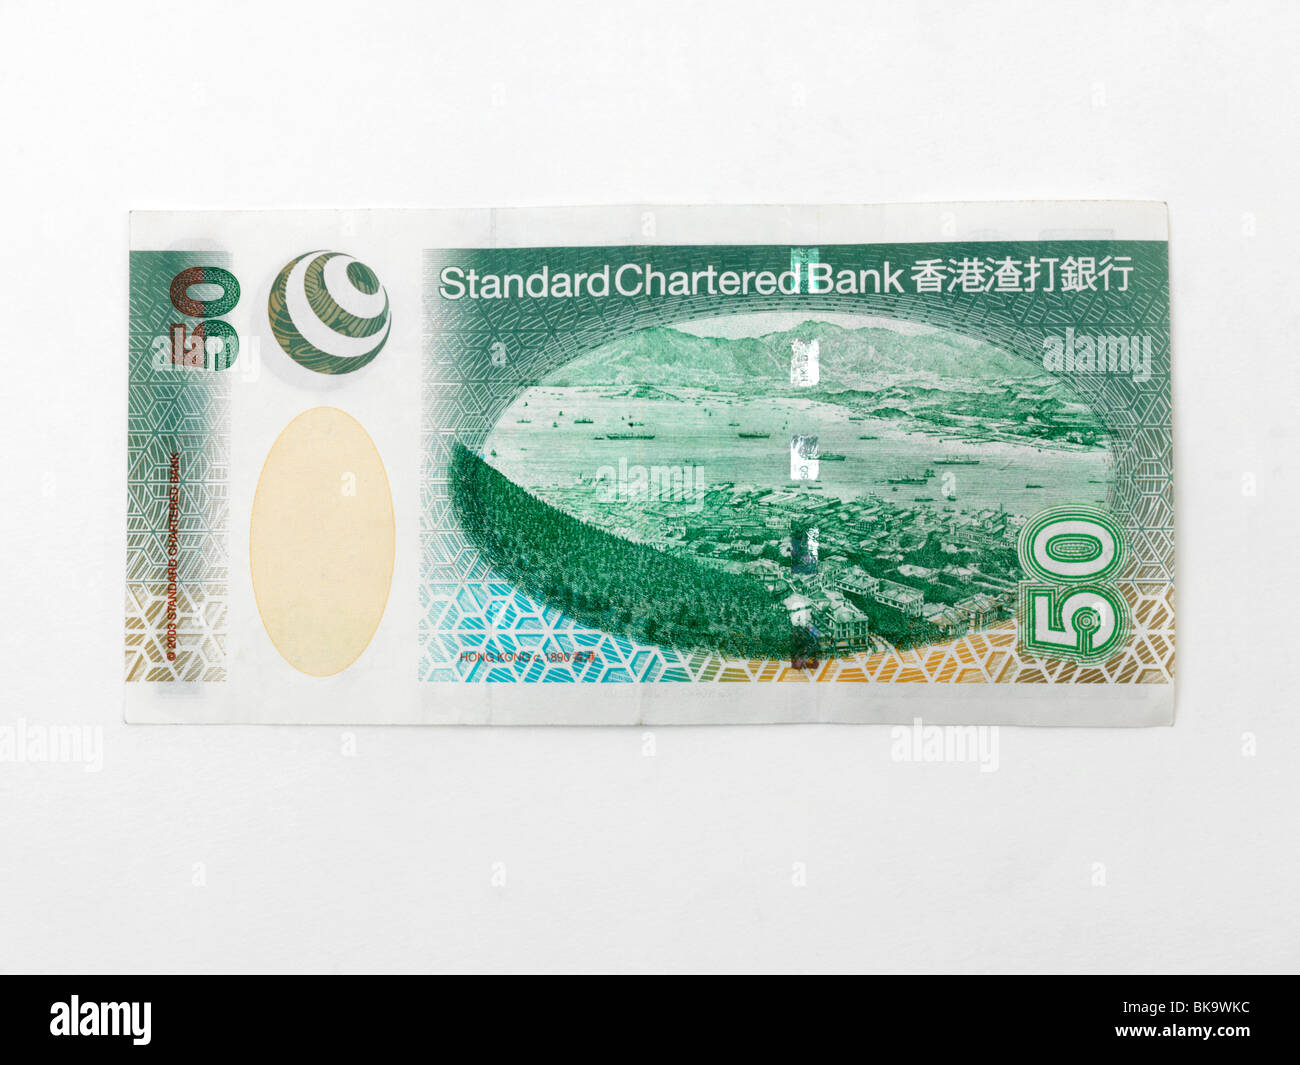 Hong Kong 50 Dollars Banknote Issued By Standard Chartered Bank Stock Photo